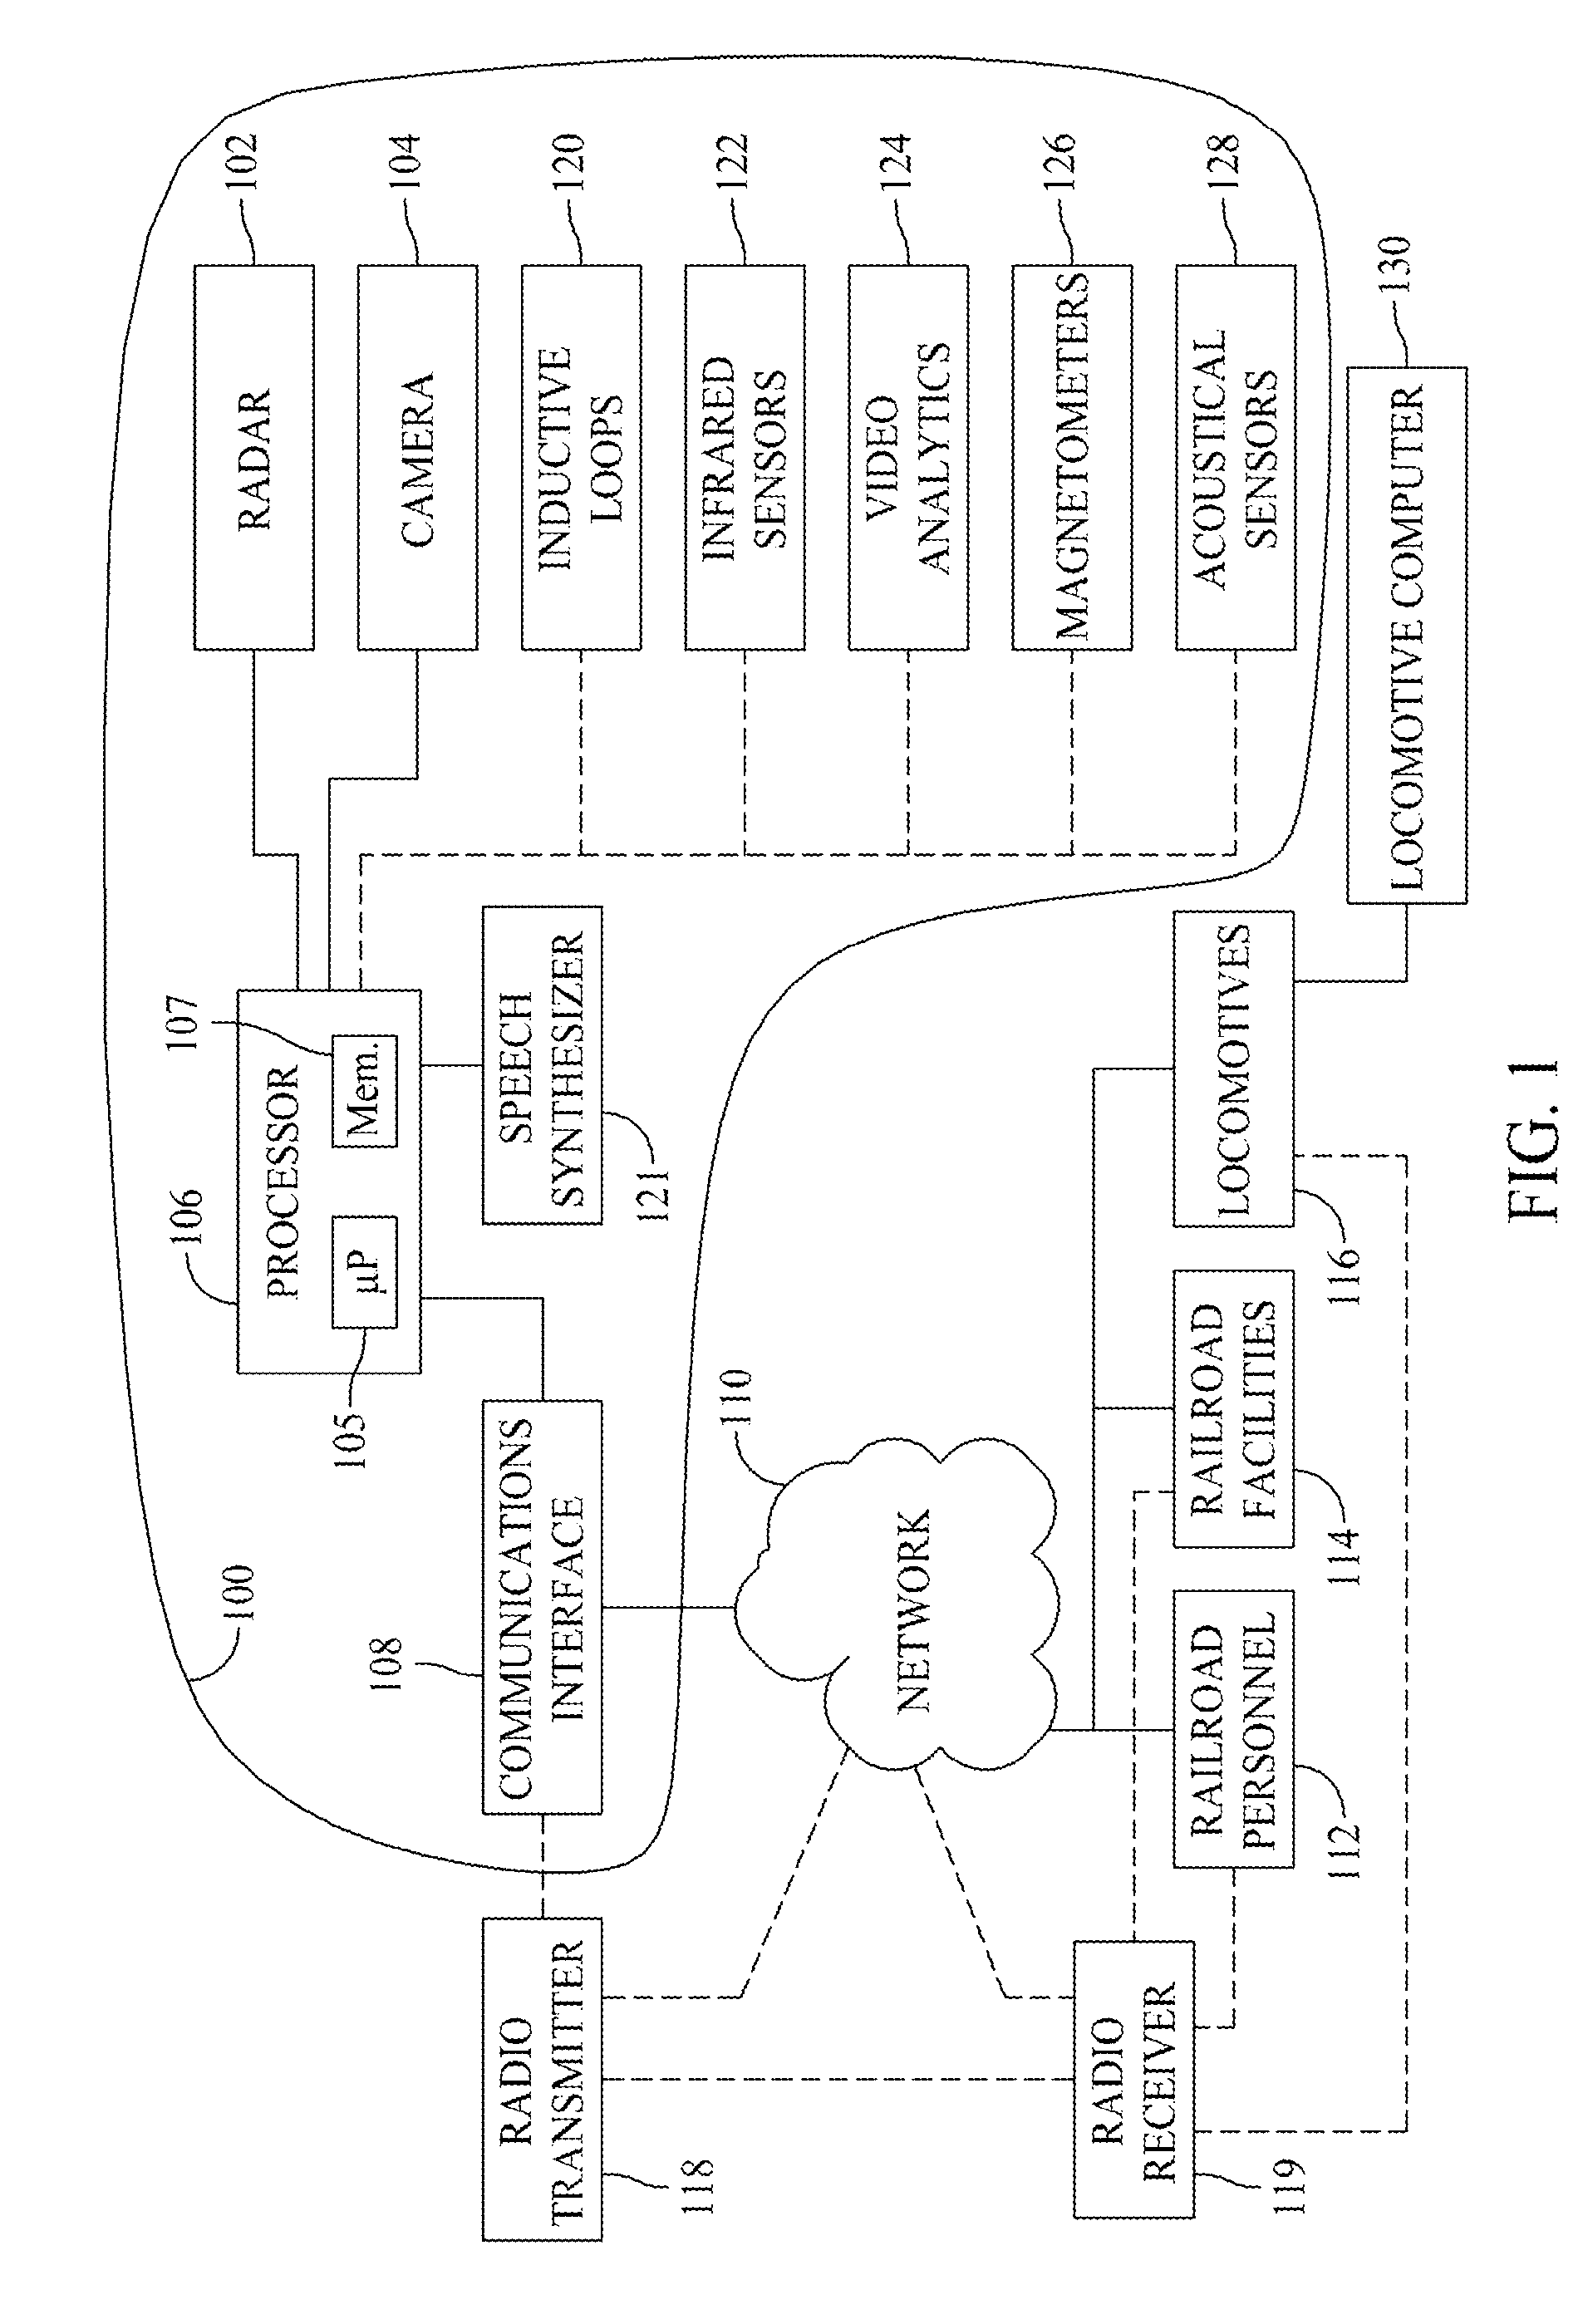 Methods and systems for detection and notification of blocked rail crossings